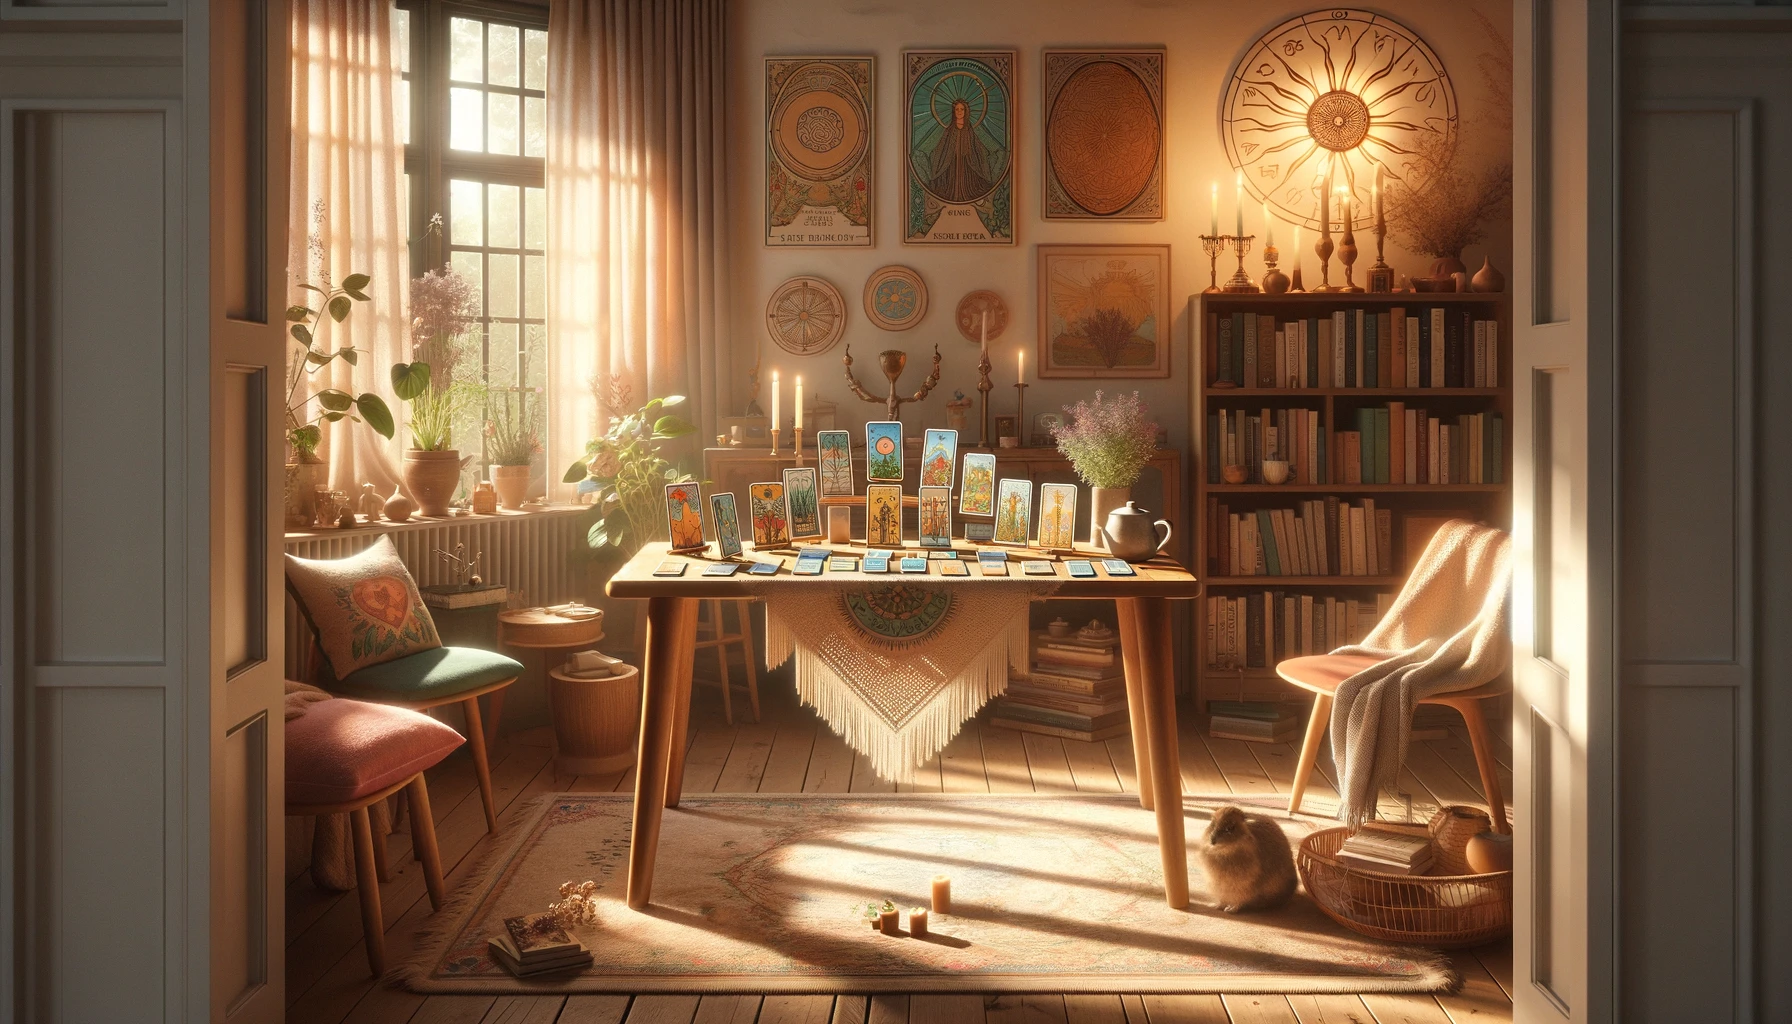 A serene sunlit room bathed in warm natural light sets the stage for a peaceful and welcoming atmosphere. In the center a wooden table is adorned